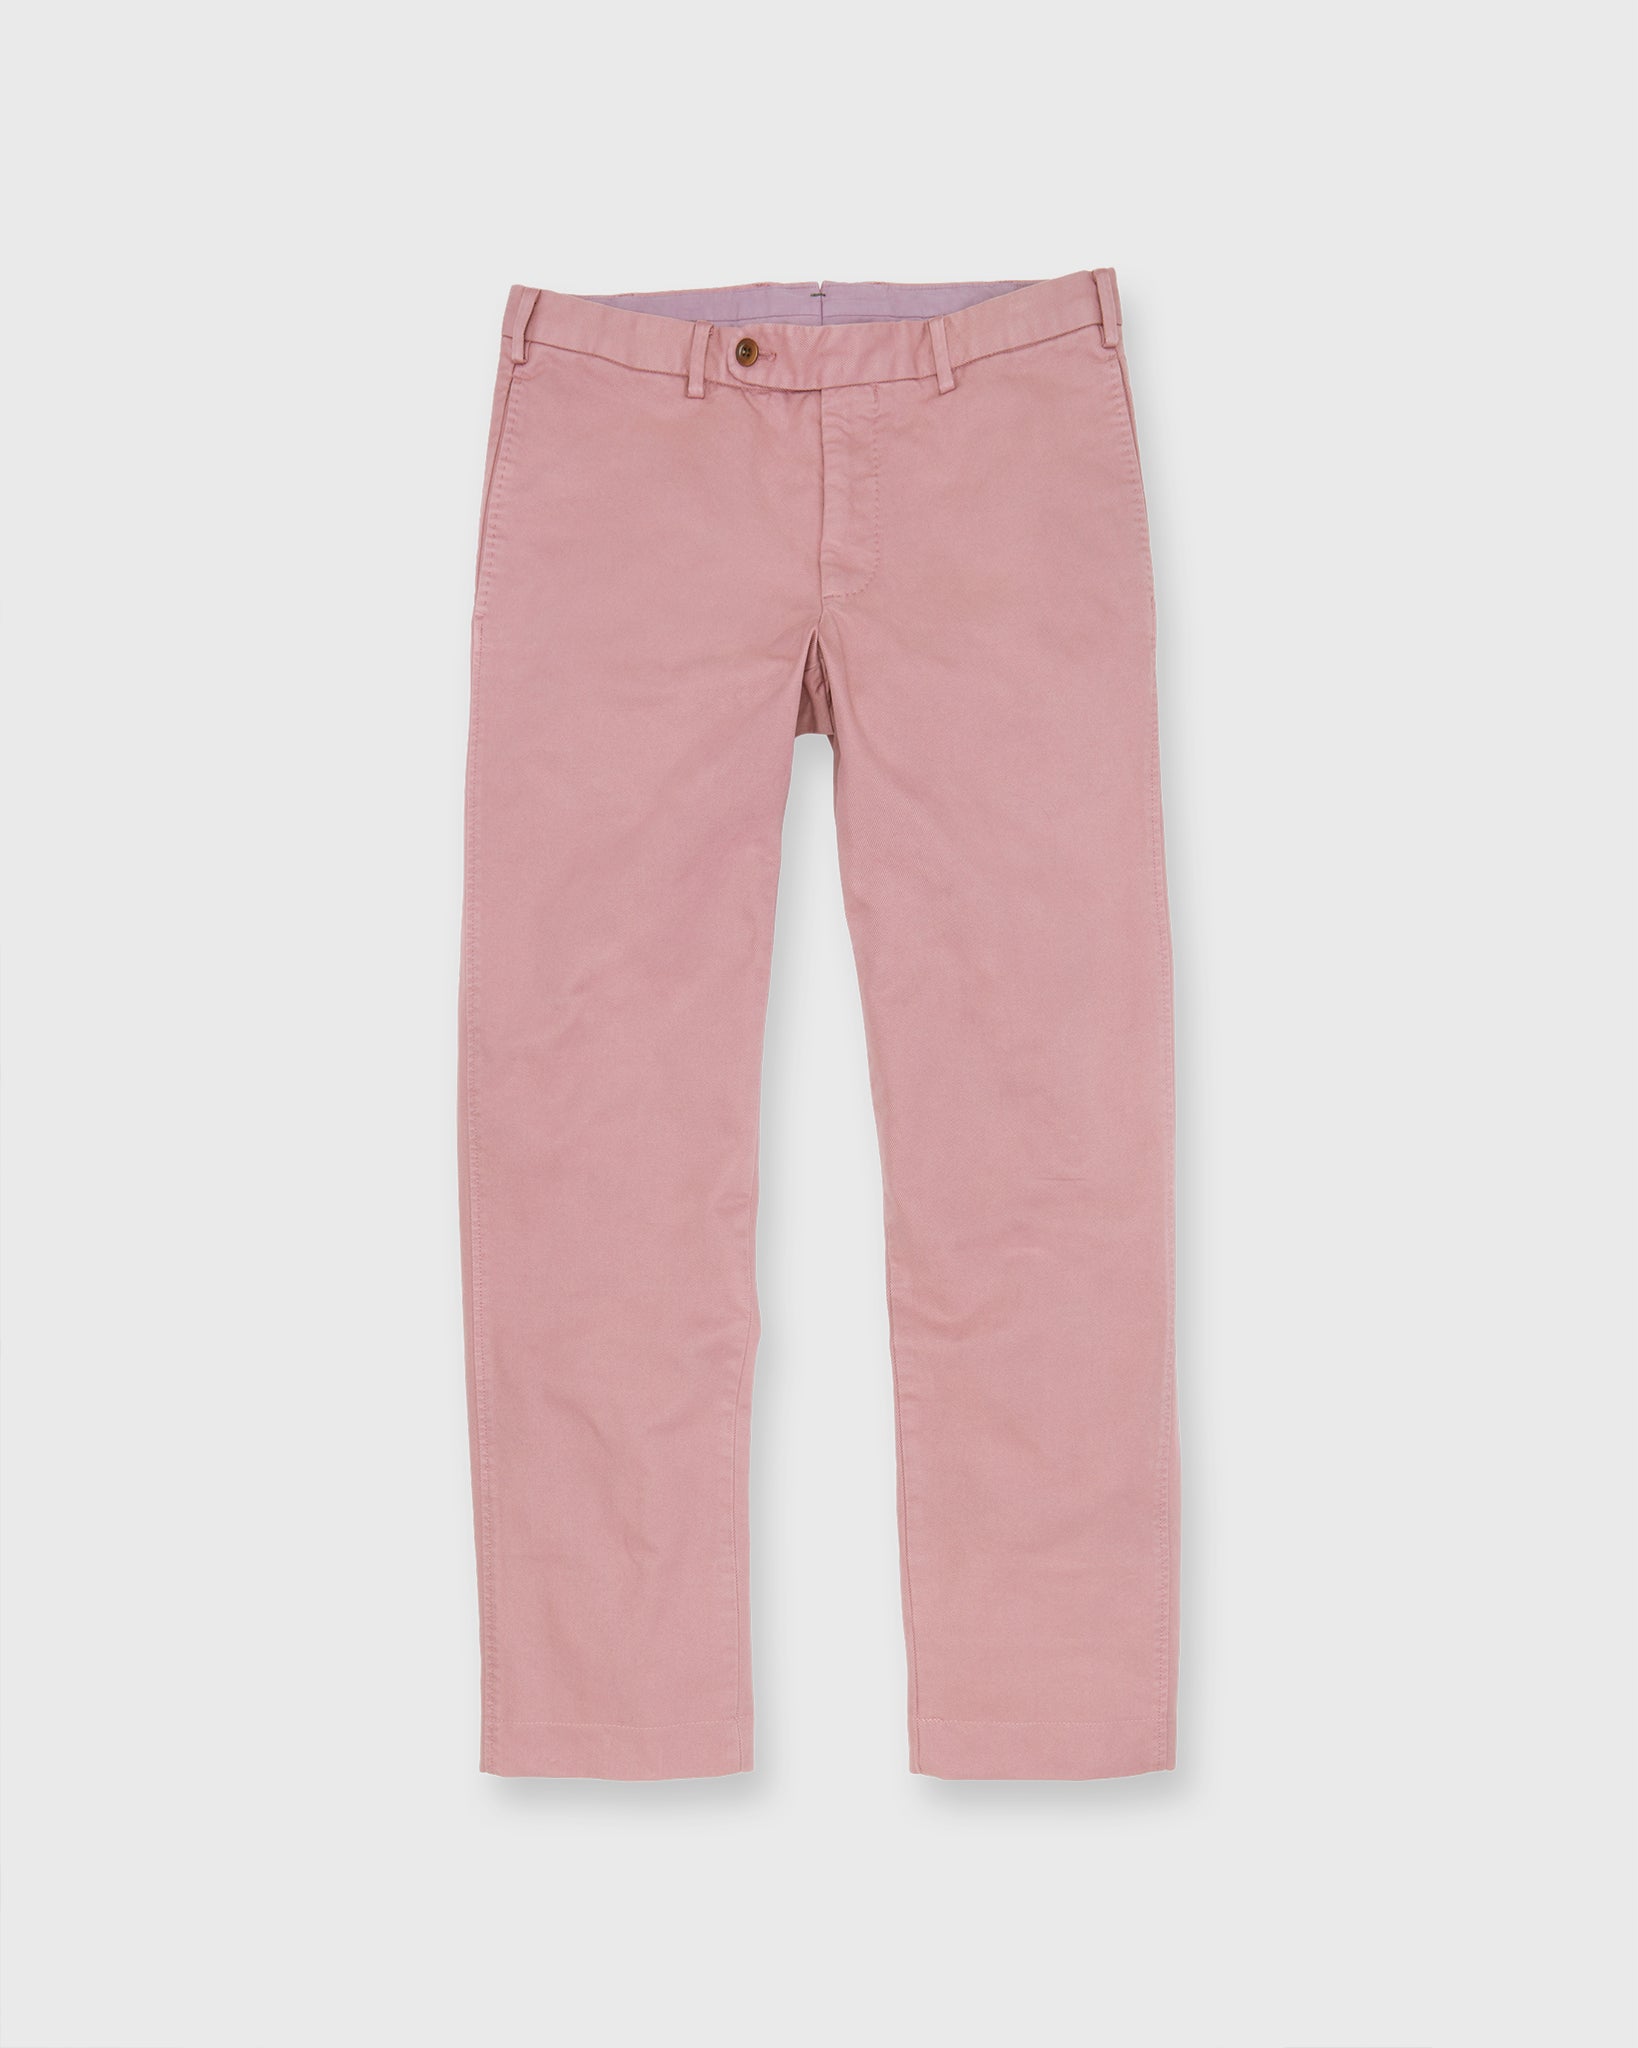 Garment-Dyed Sport Trouser in Orchid High Ridge Twill